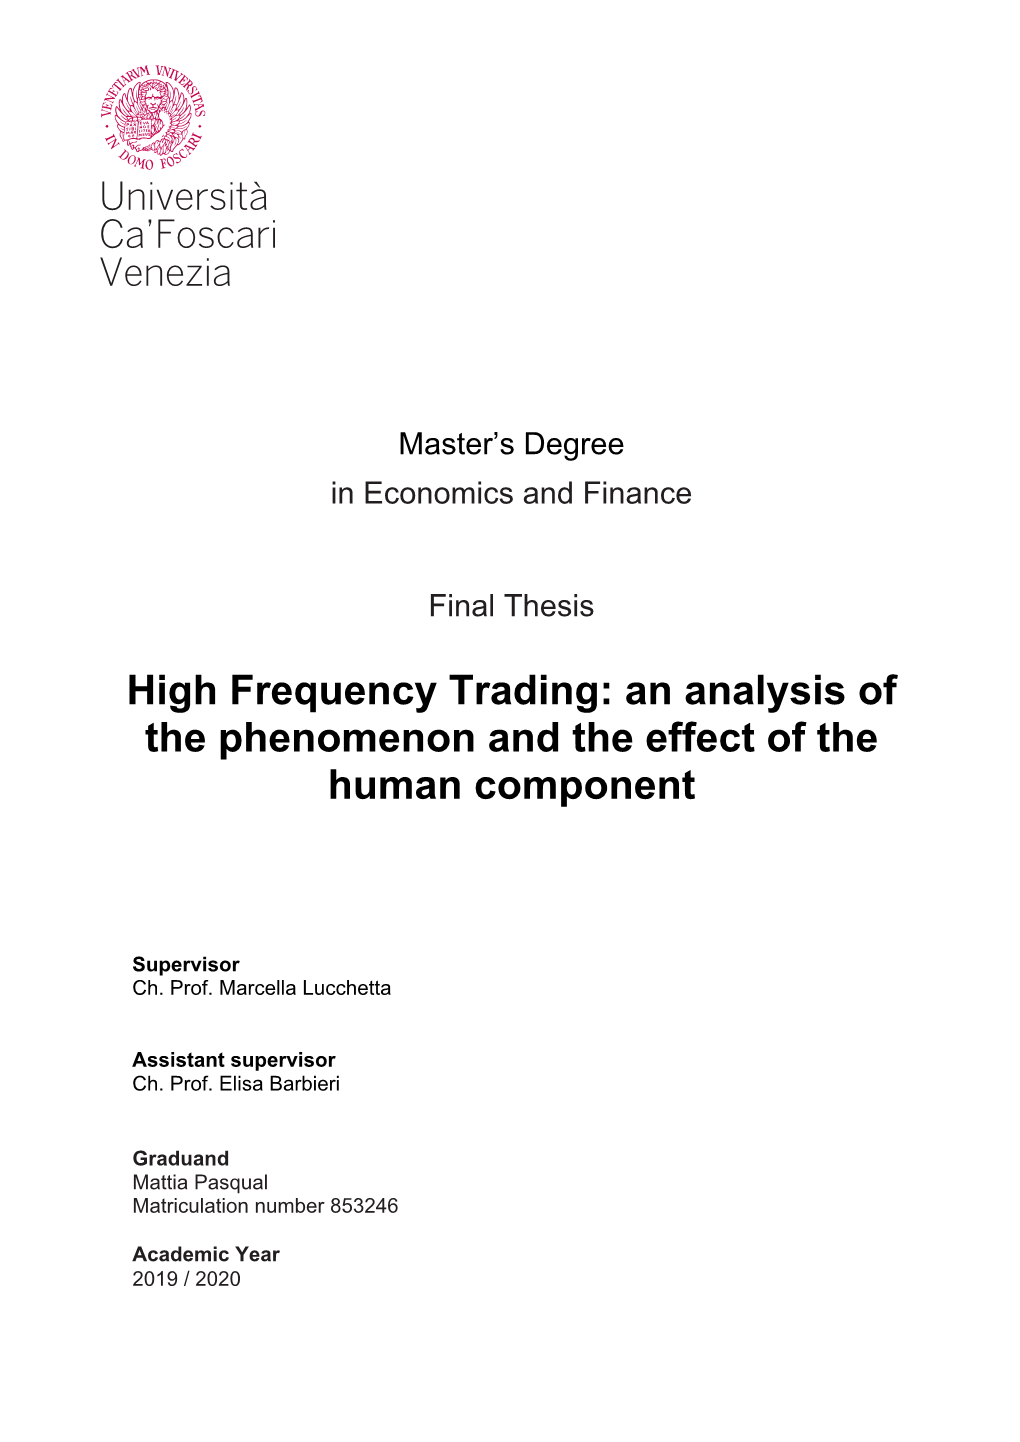 High Frequency Trading: an Analysis of the Phenomenon and the Effect of the Human Component